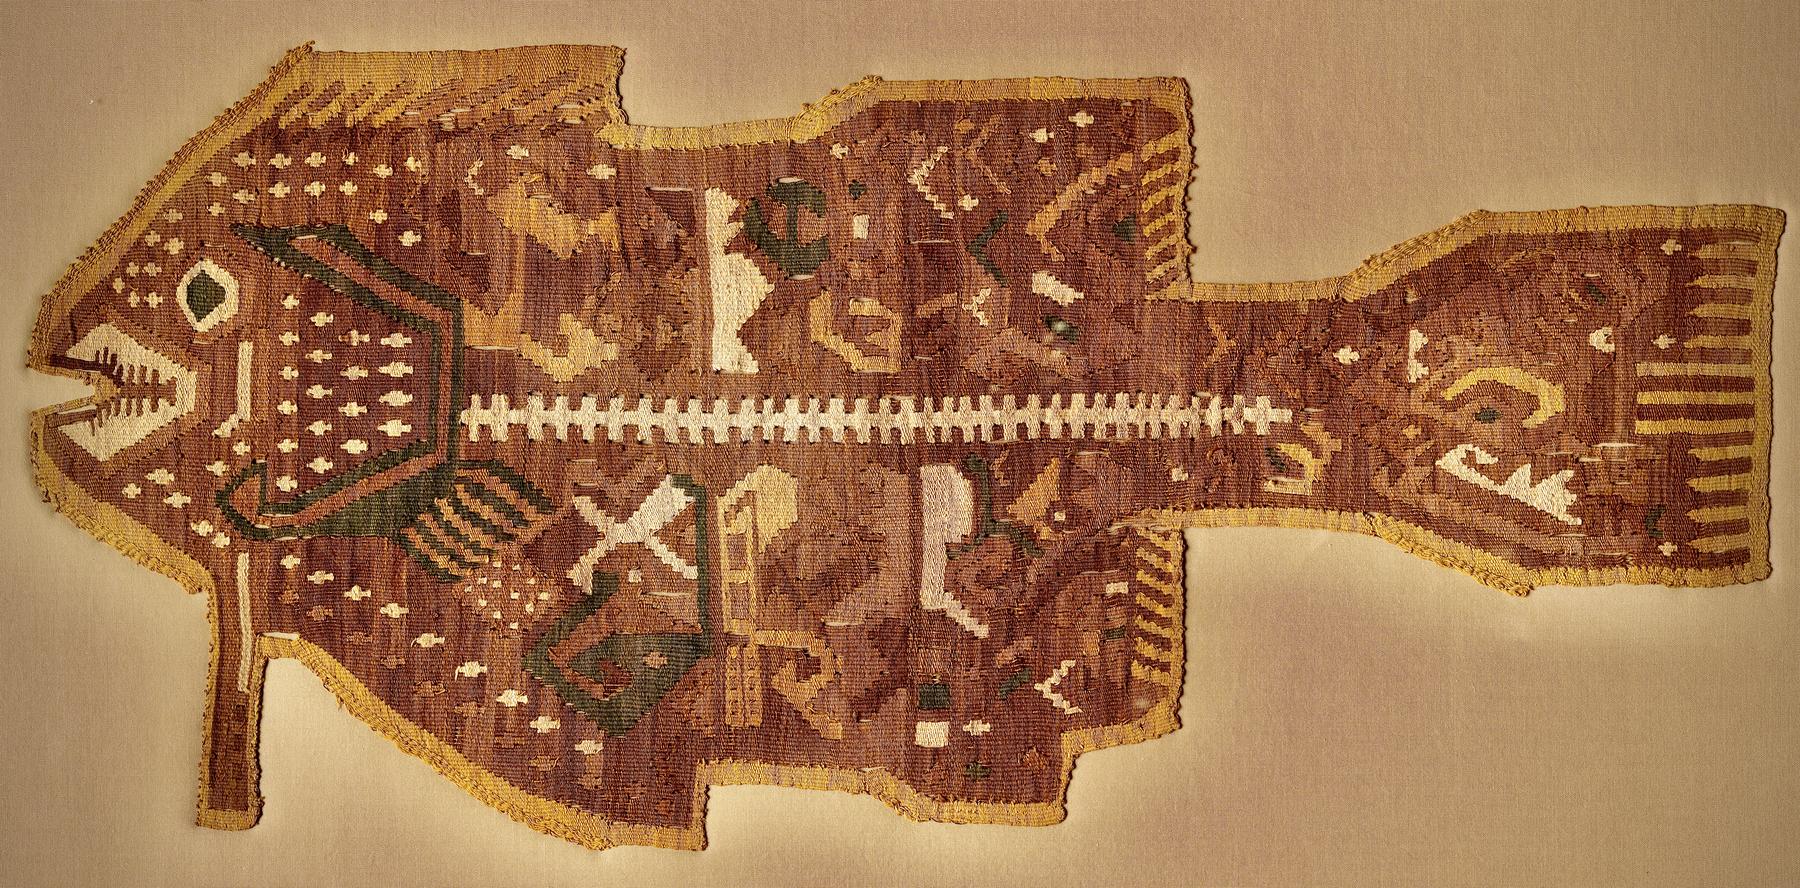 a piece of cloth with a fish on it - File:15th century Ychsma textile, Peru.jpg